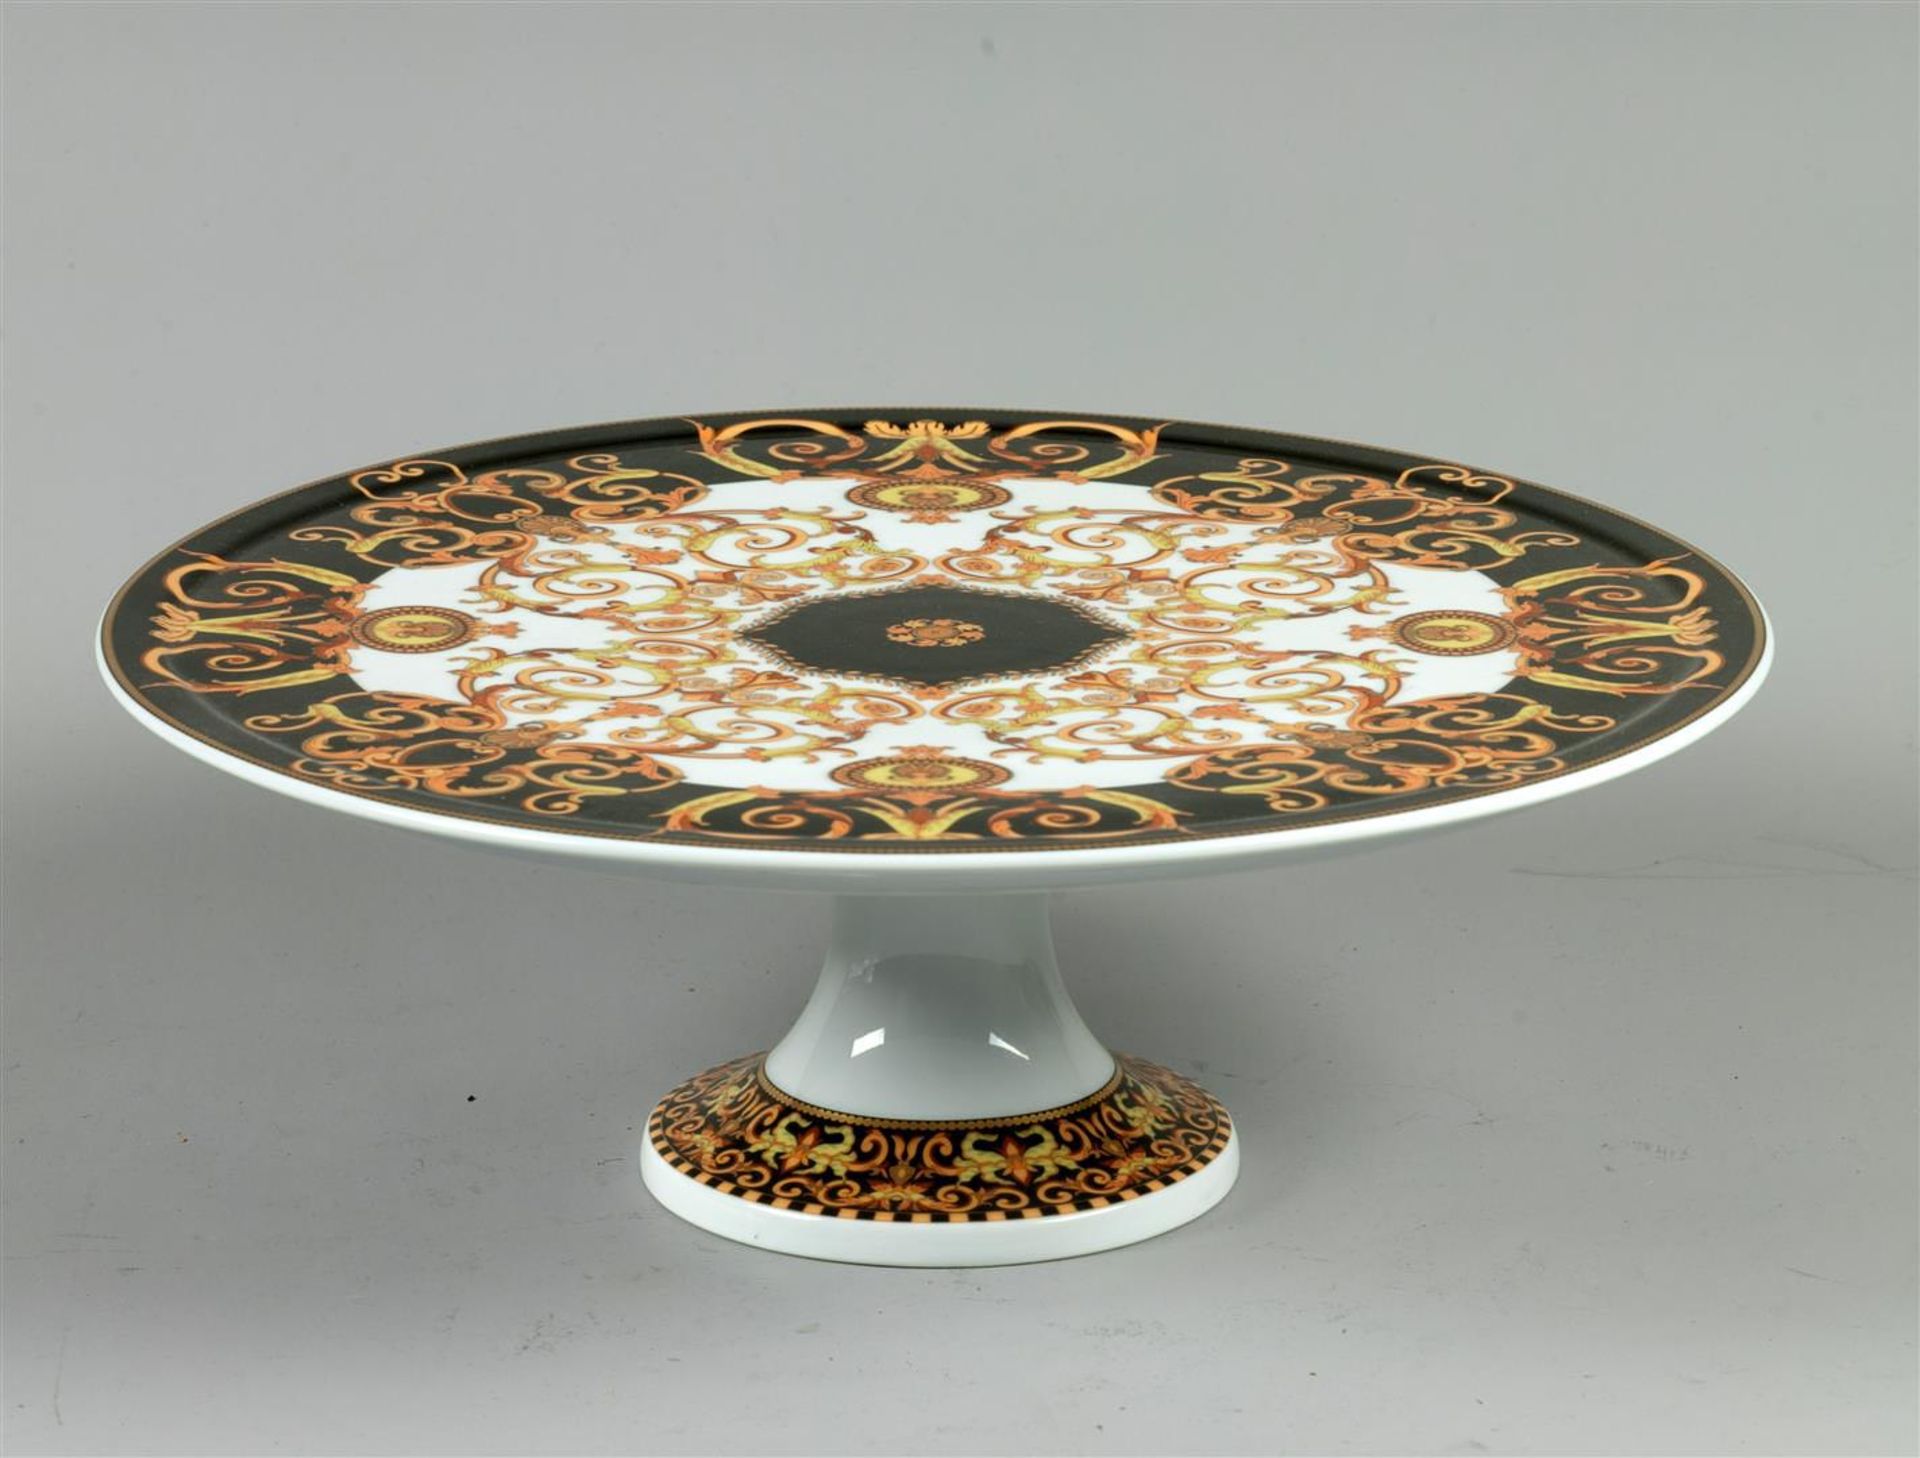 A porcelain cake tray with Baroque decor, Rosenthal for Versace. Germany, late 20th century.